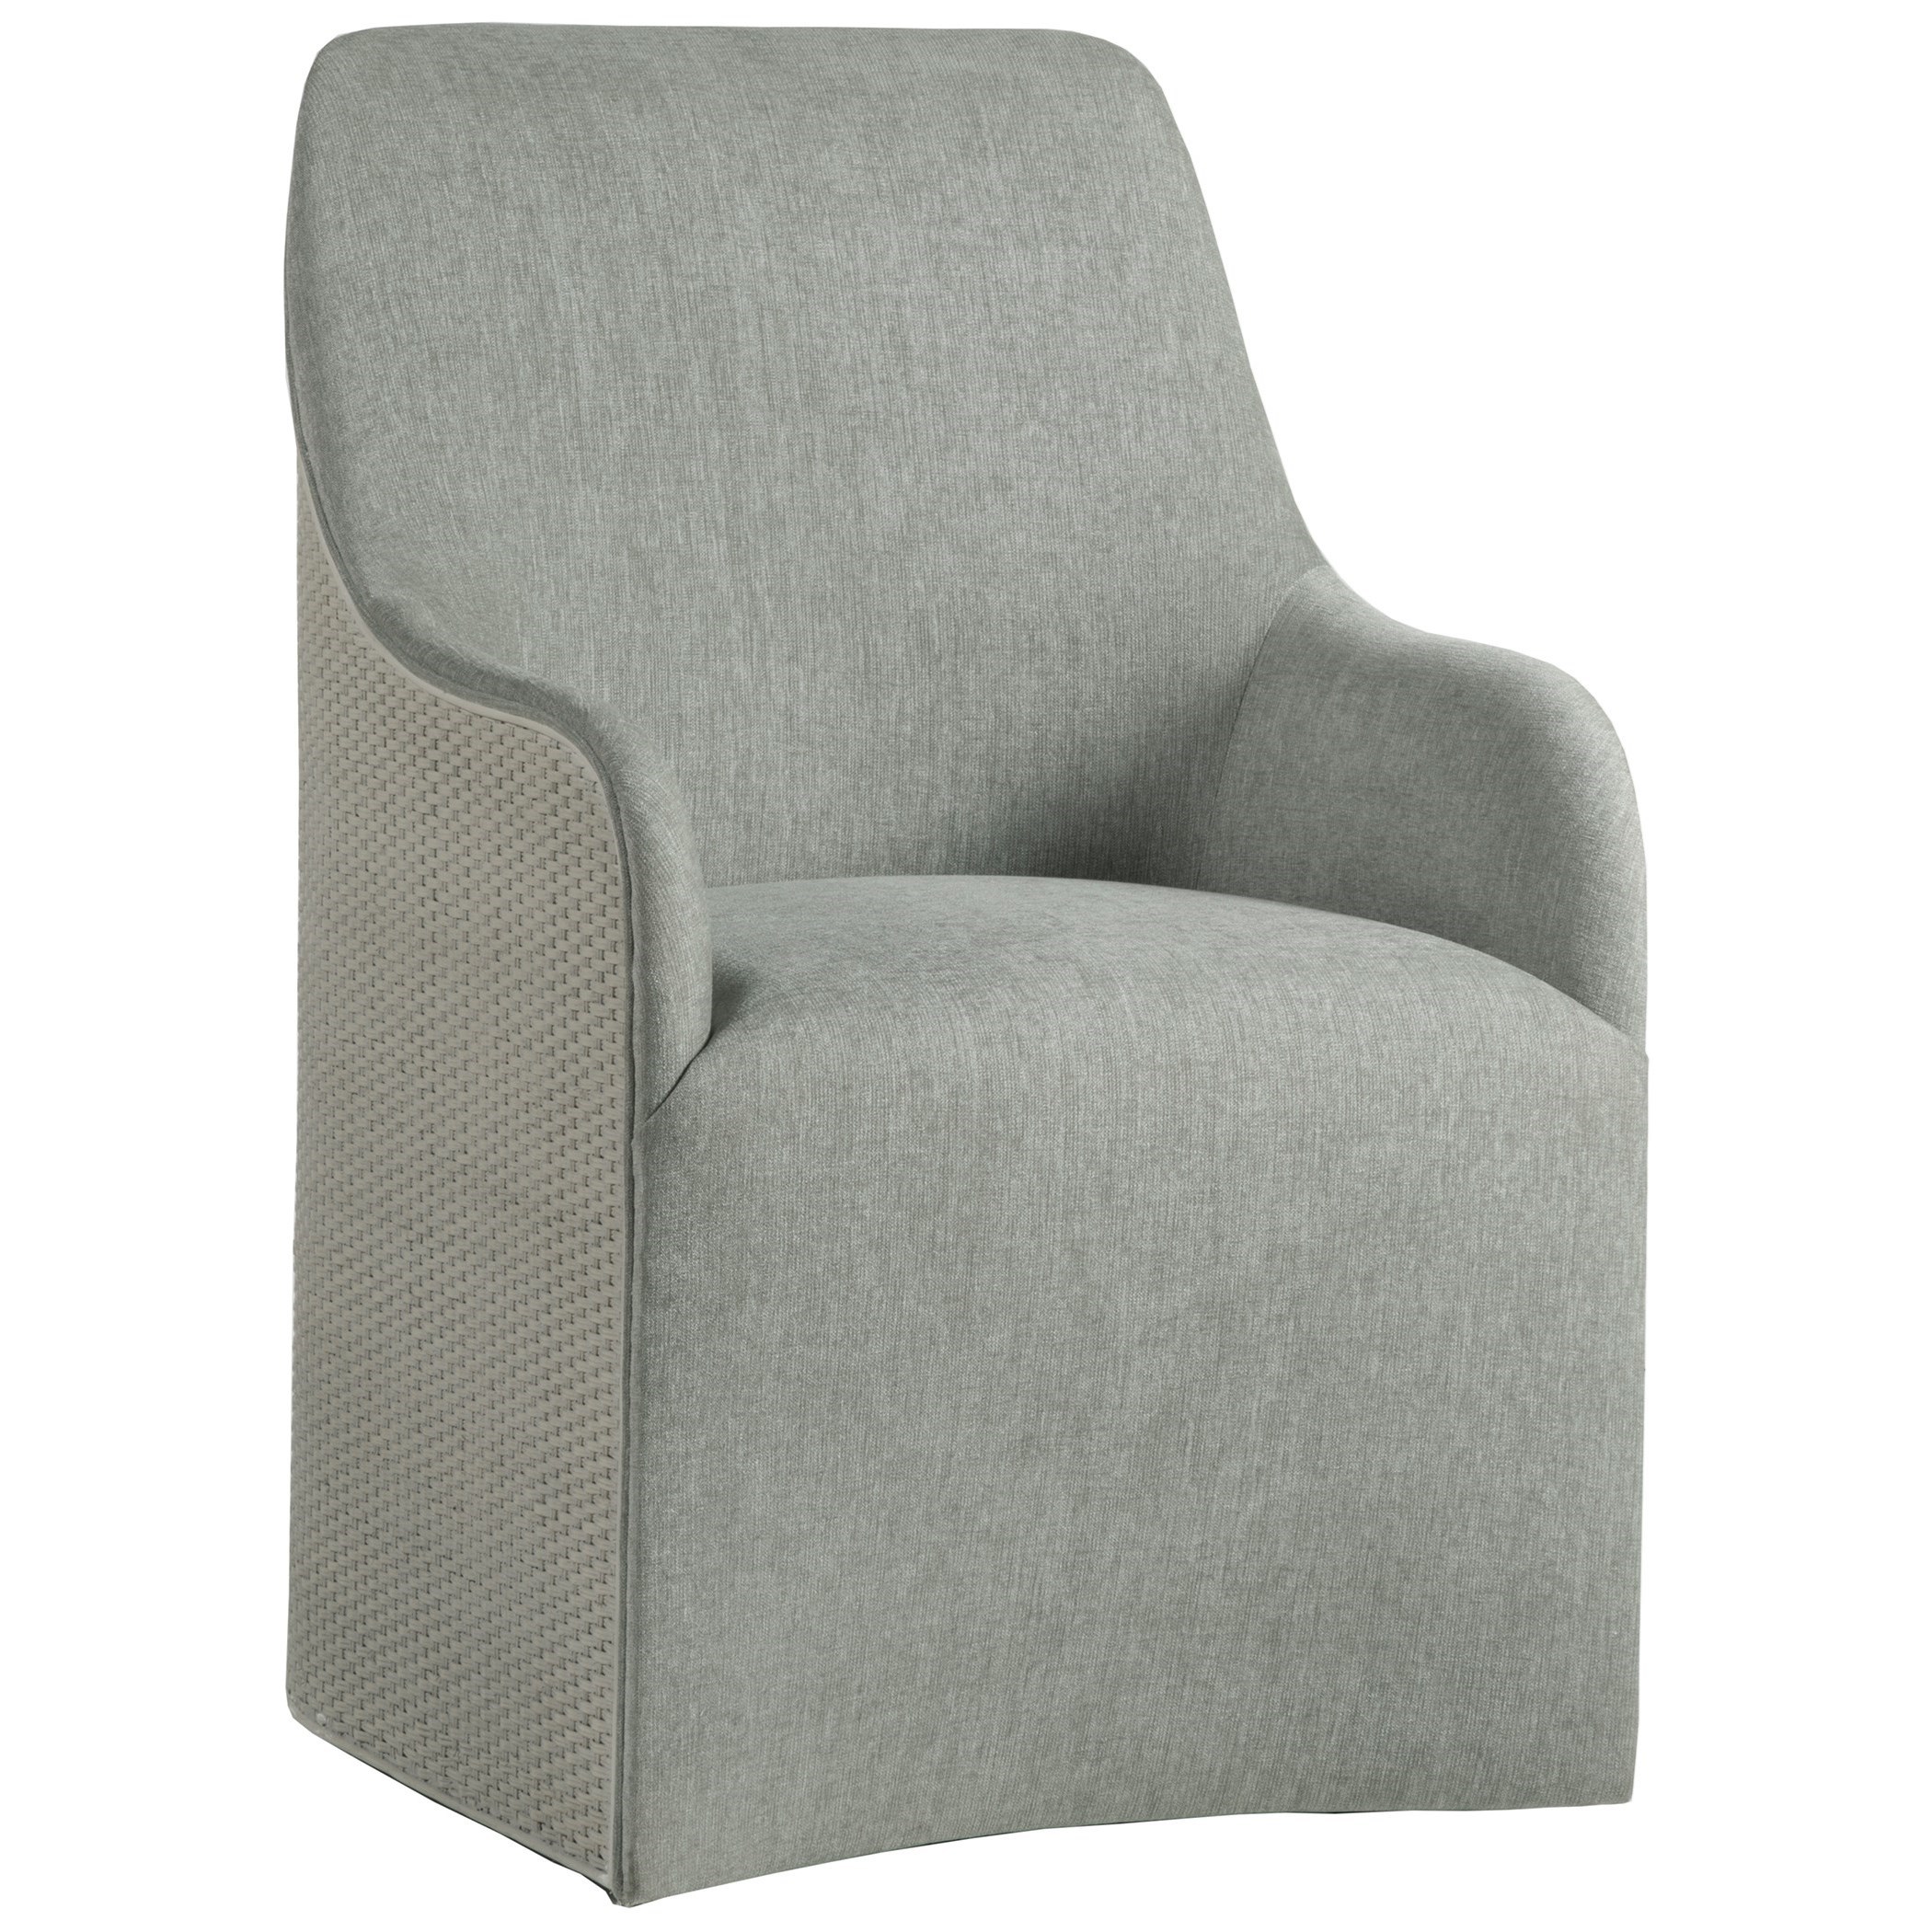 Upholstered Dining Host Chair with Cane Accents and Casters